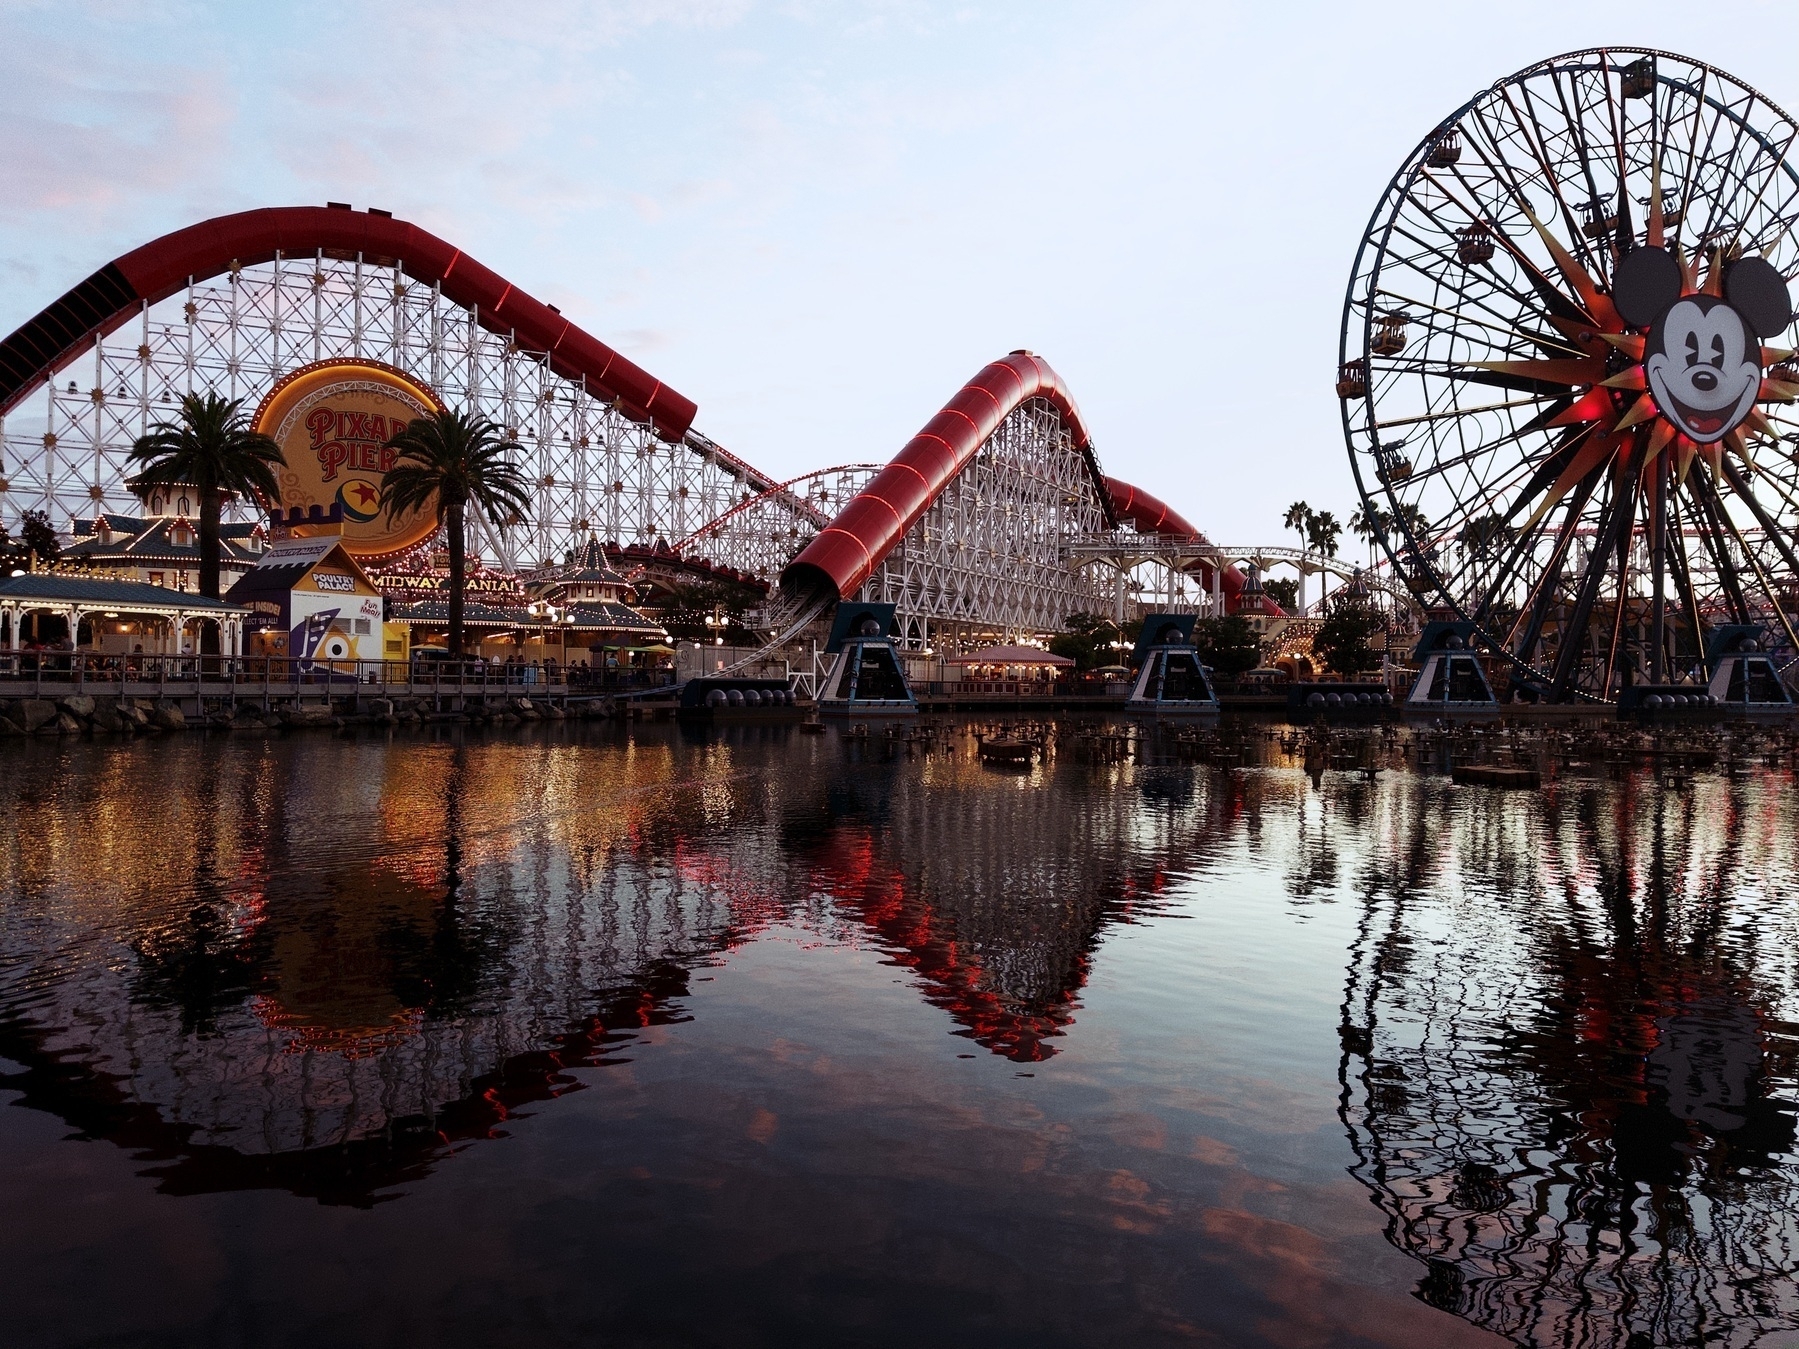 Pixar Pier in the golden hour. The Incredicoaster and Fun Wheel reflect on the pool in the foreground.